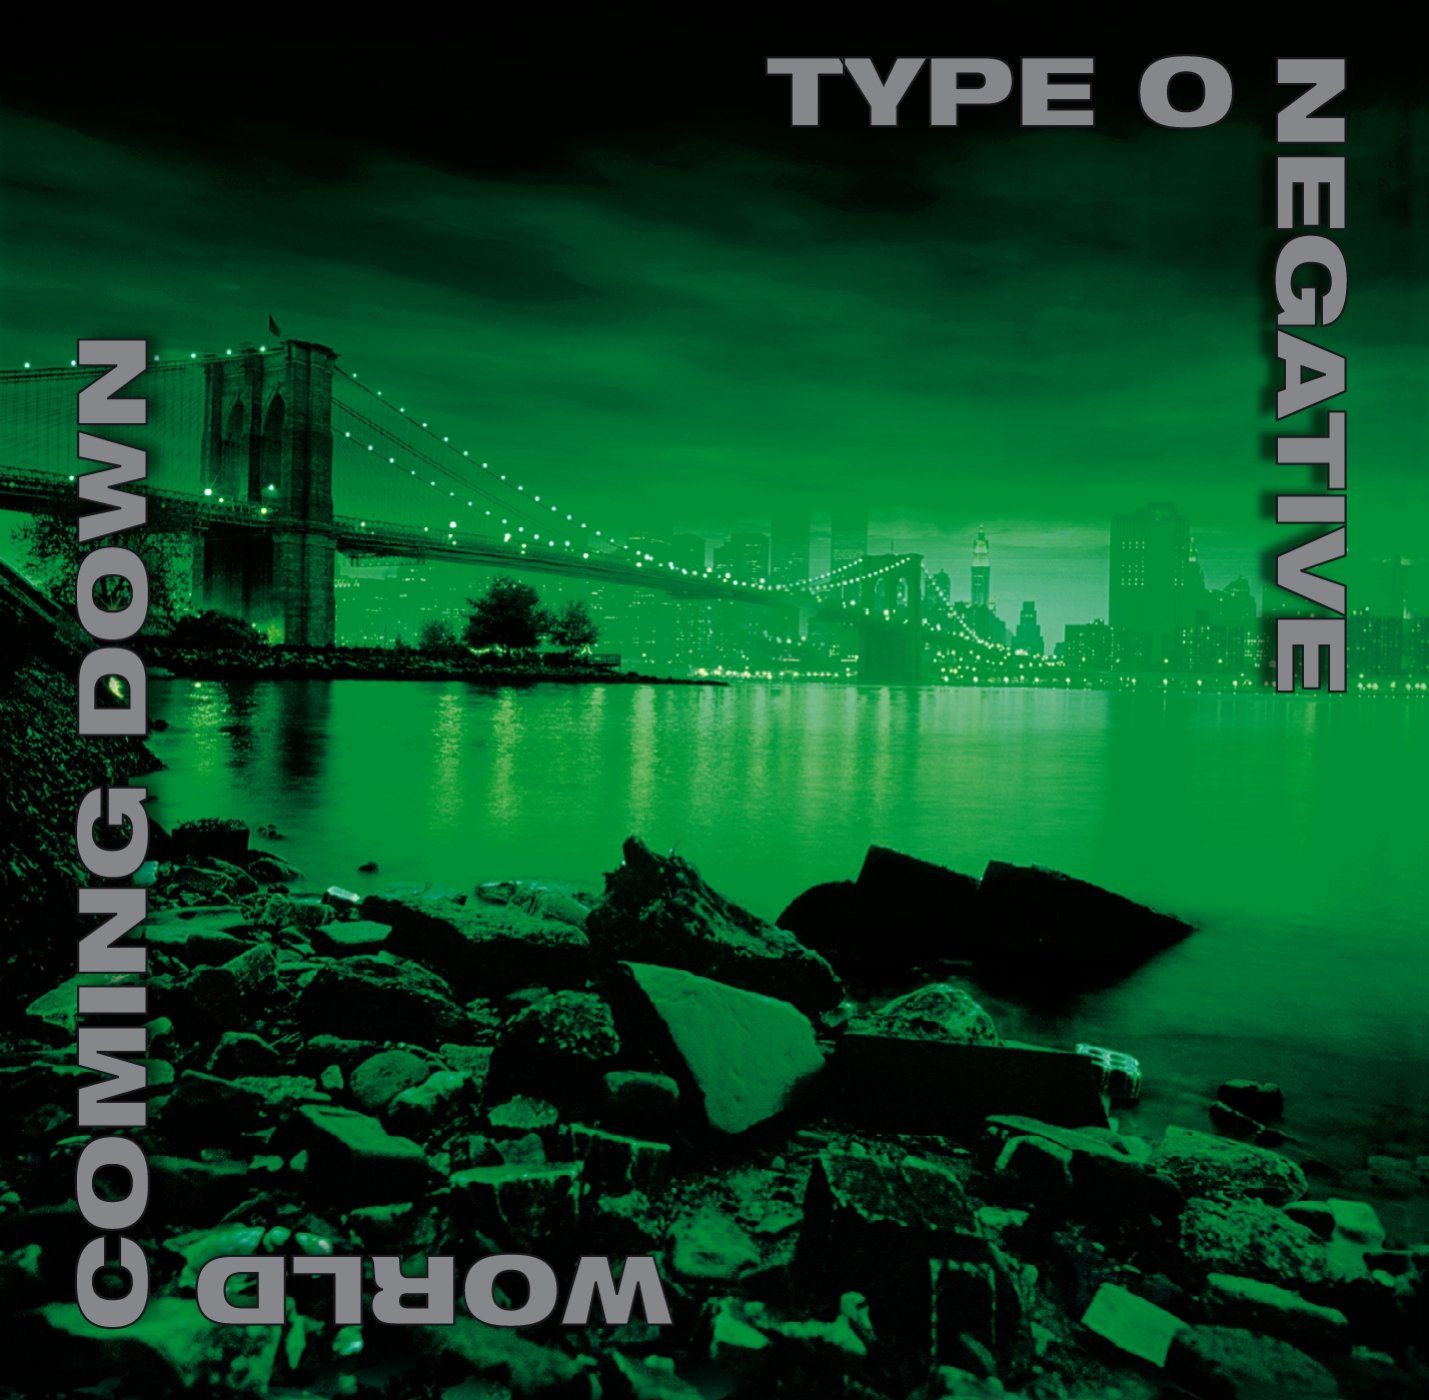 type-0-negative-world-coming-down